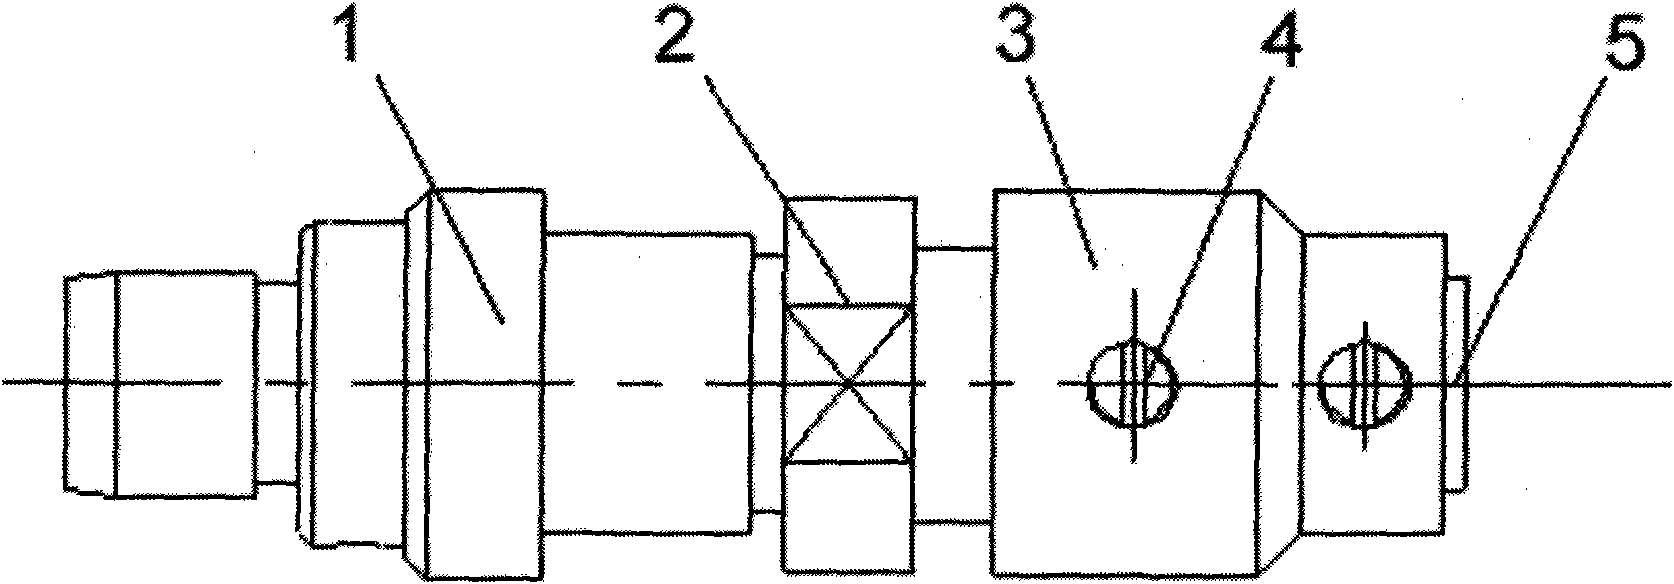 Phase-adjustable radio frequency coaxial connector